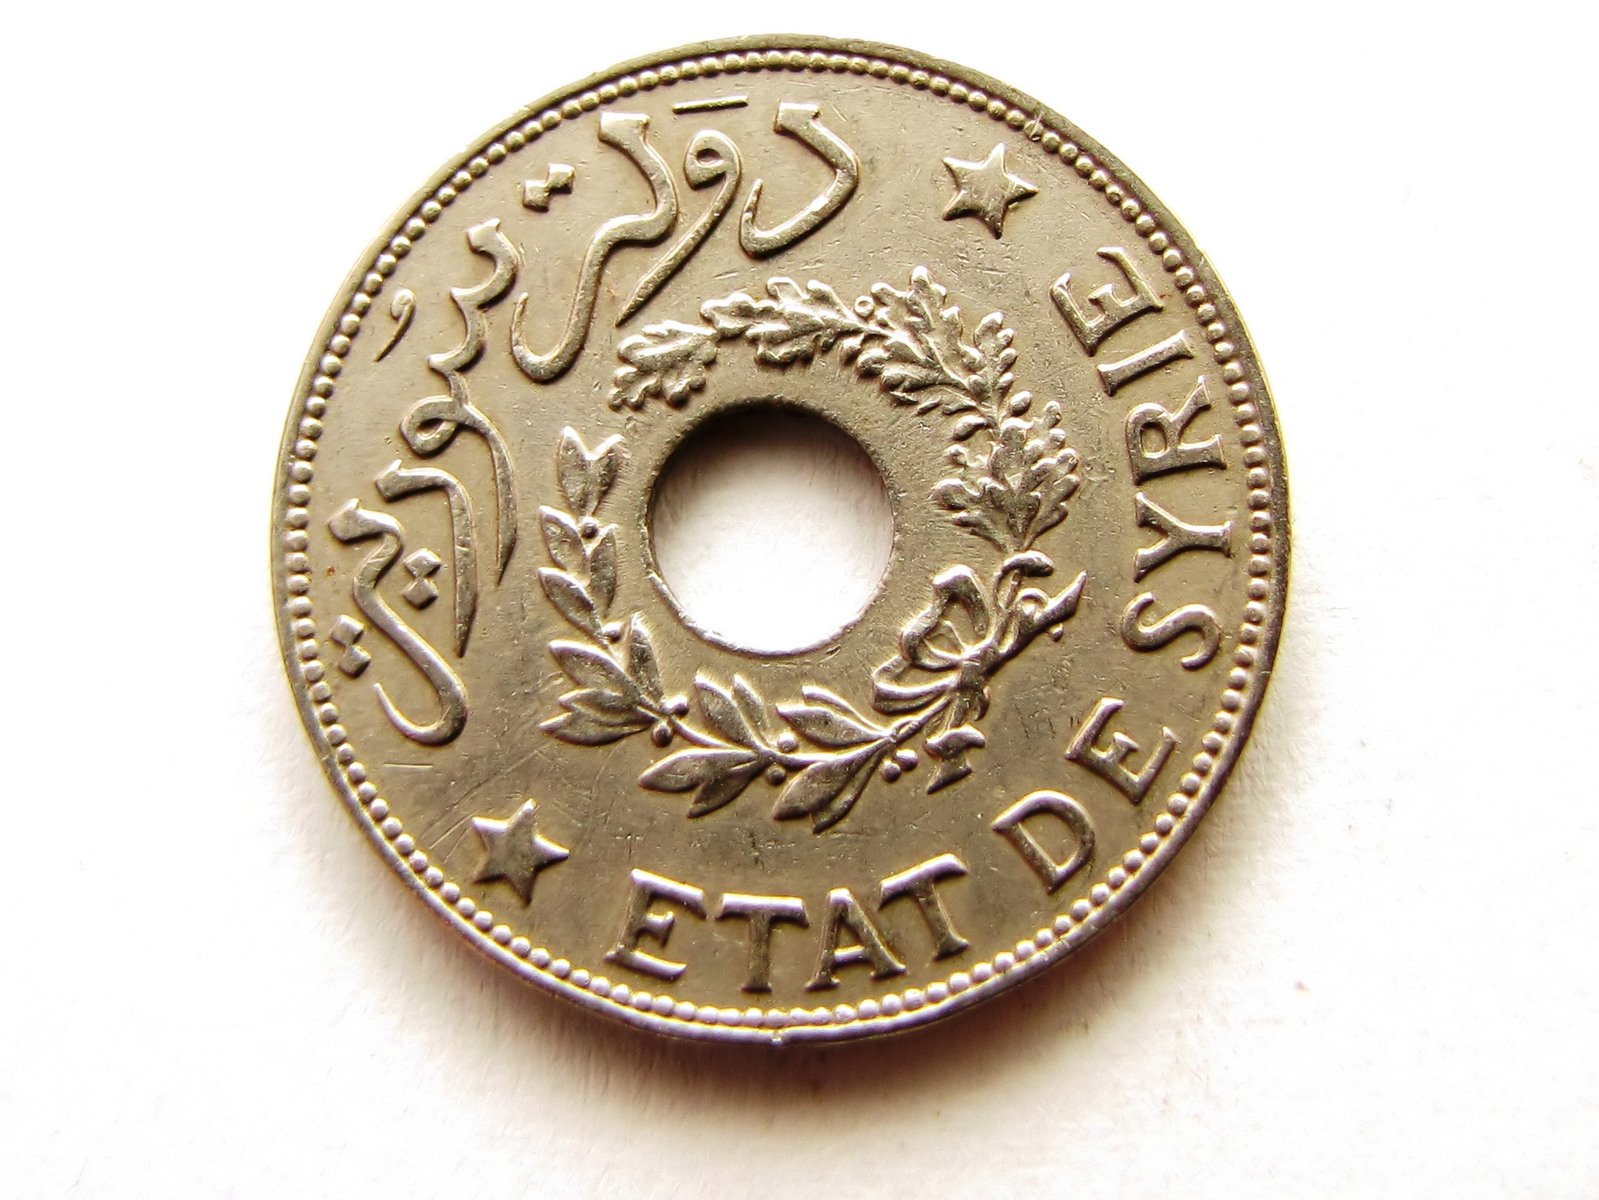 a 1 pound coin is shown with arabic writing on it